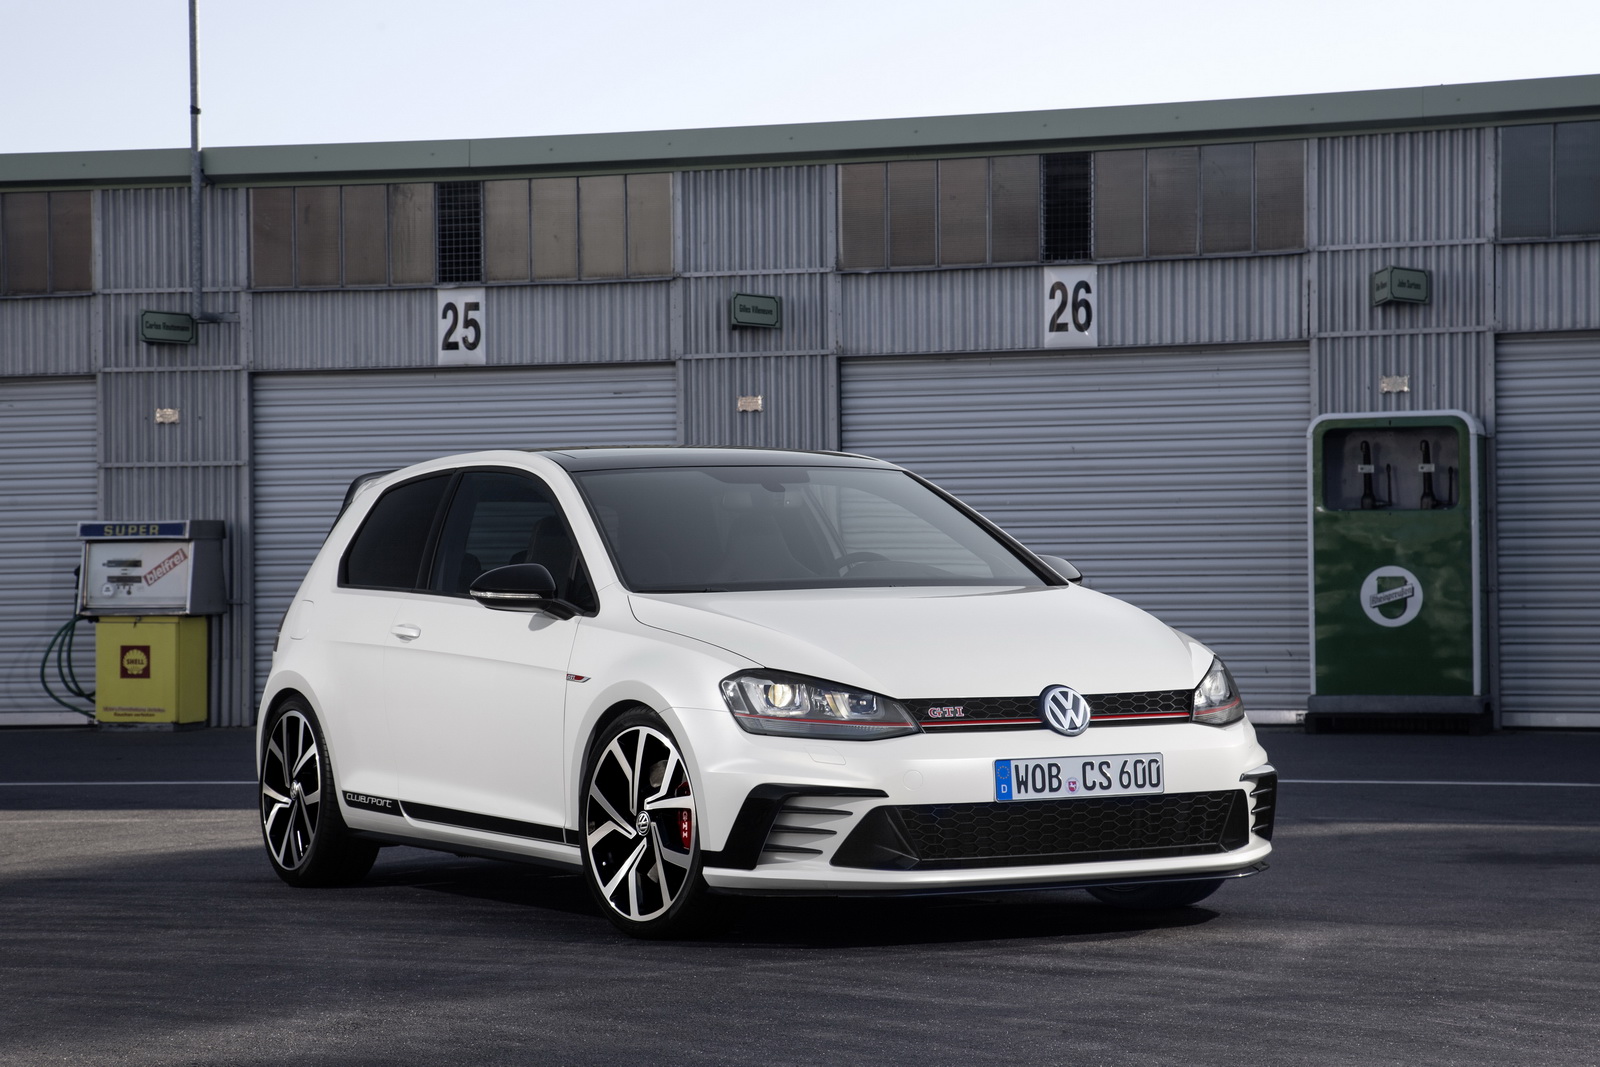 New VW Golf GTI Clubsport Arrives In The UK Just In Time For The 40th Ann.